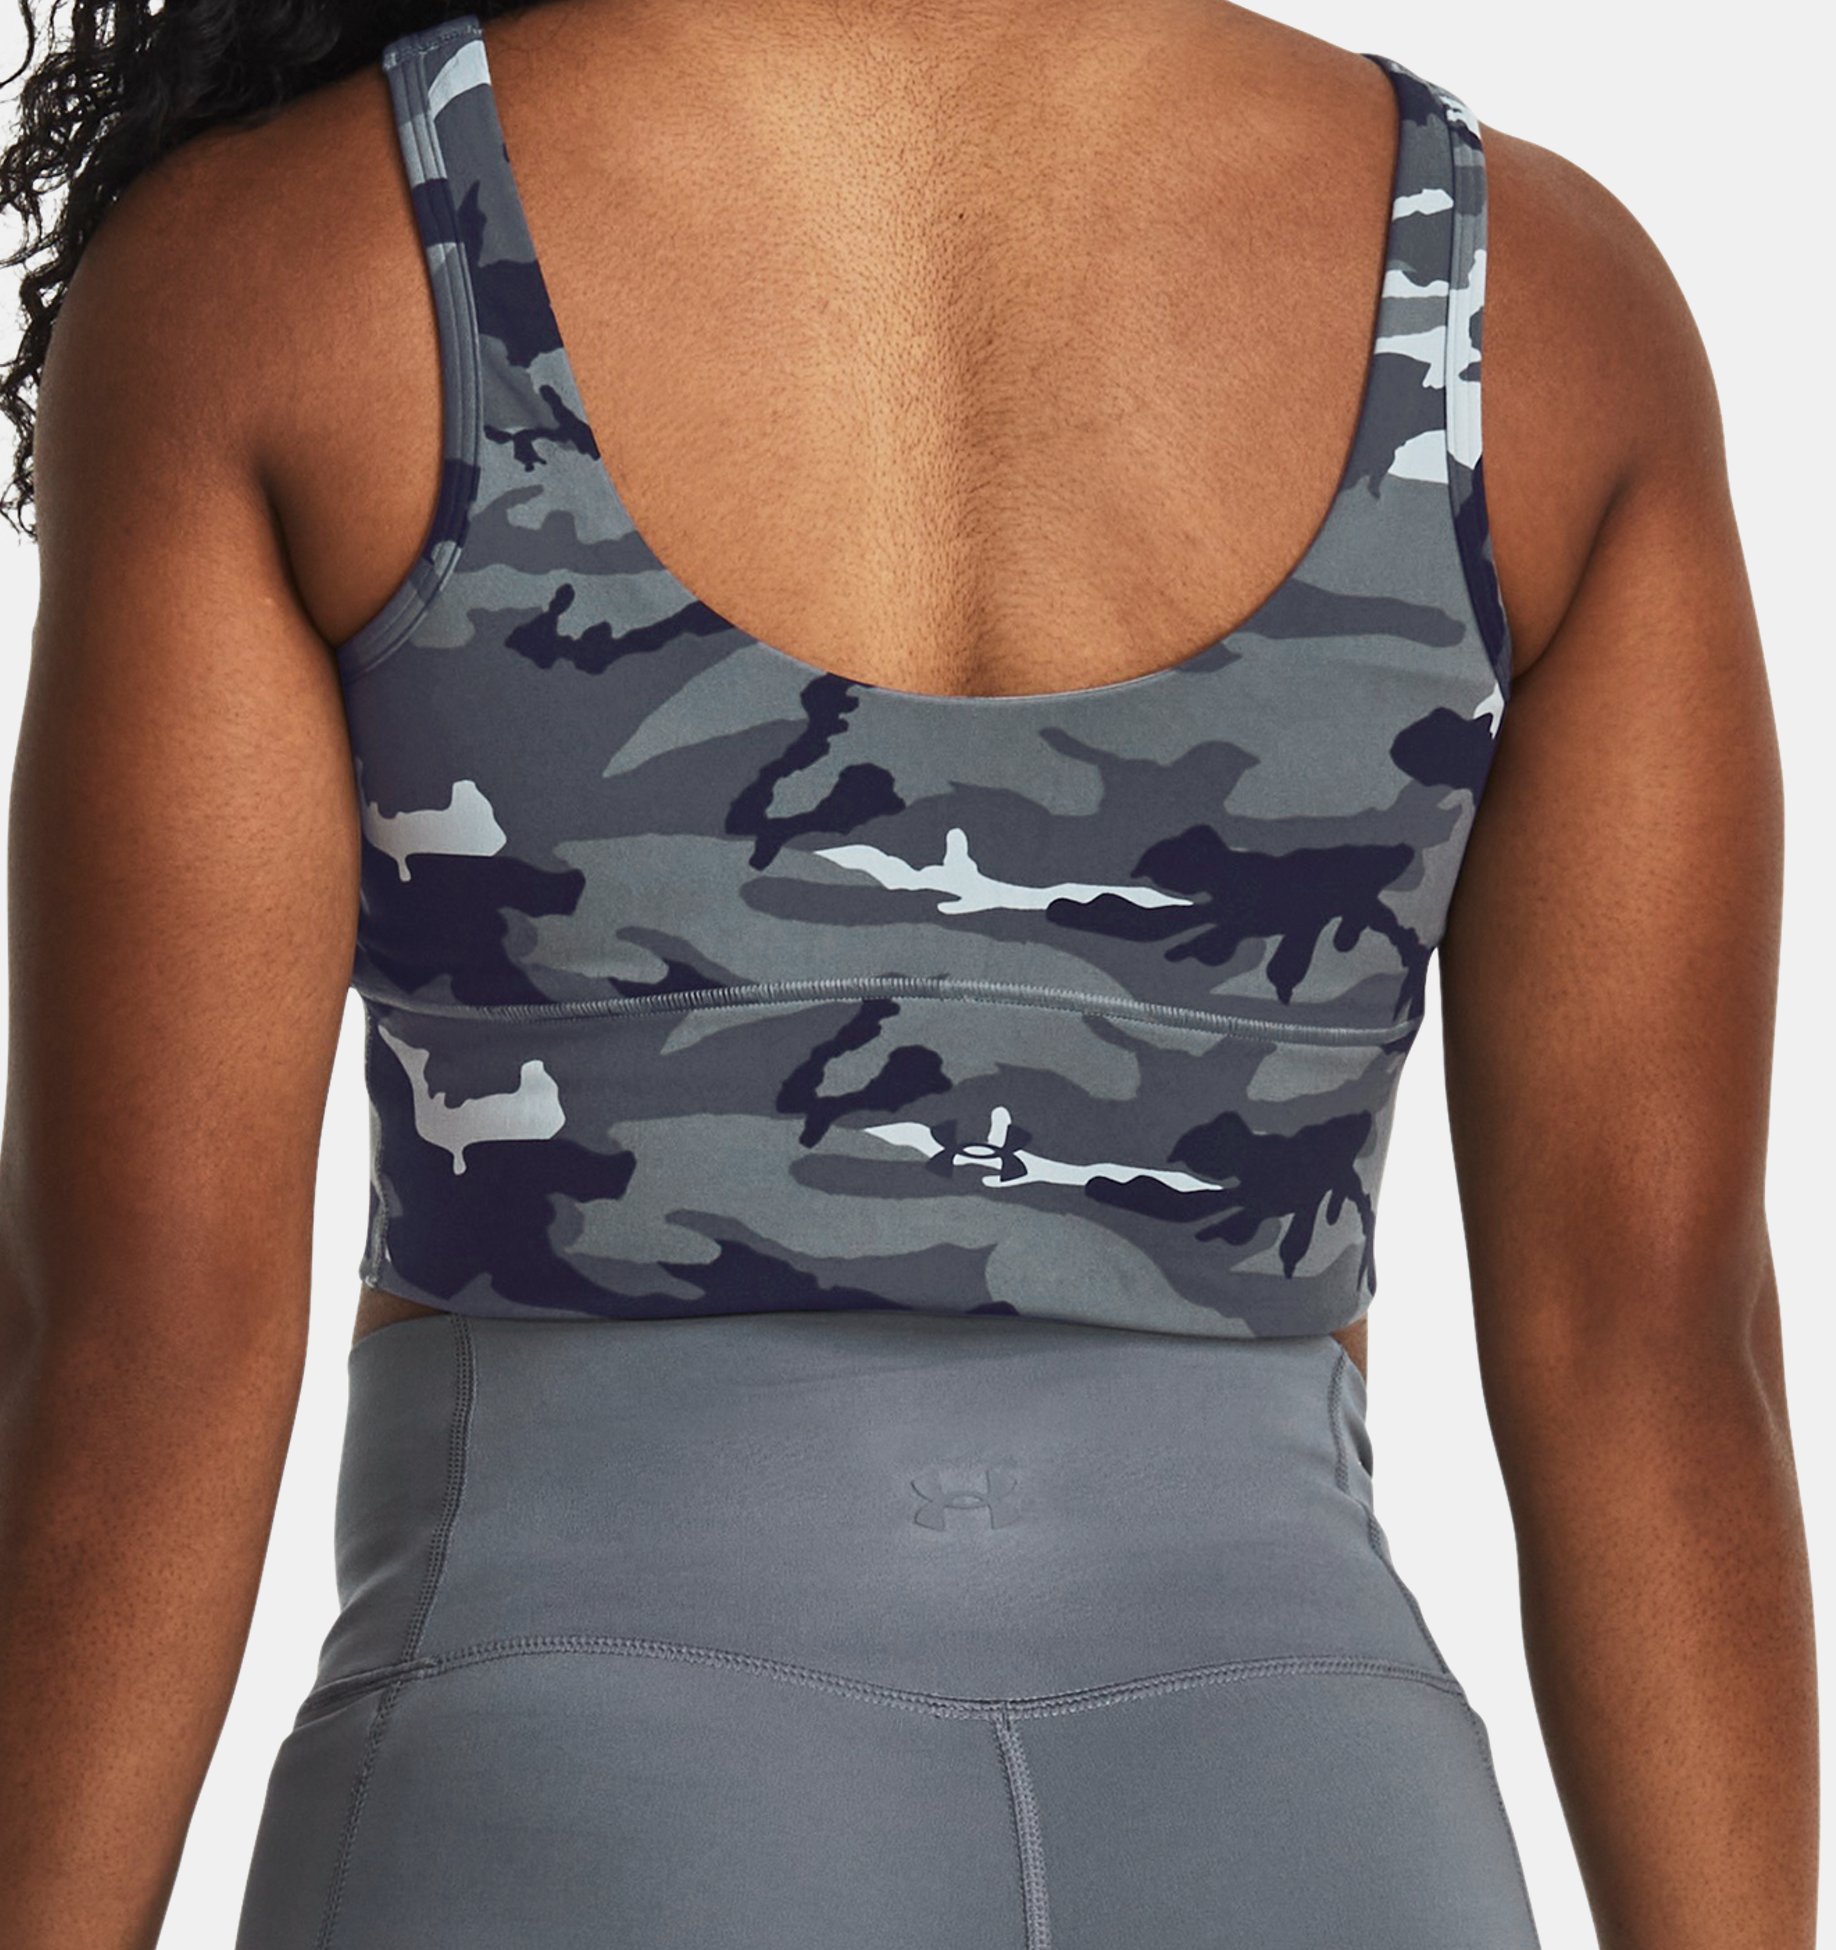 https://underarmour.scene7.com/is/image/Underarmour/V5-1380983-465_BC?rp=standard-0pad|pdpZoomDesktop&scl=0.72&fmt=jpg&qlt=85&resMode=sharp2&cache=on,on&bgc=f0f0f0&wid=1836&hei=1950&size=1500,1500